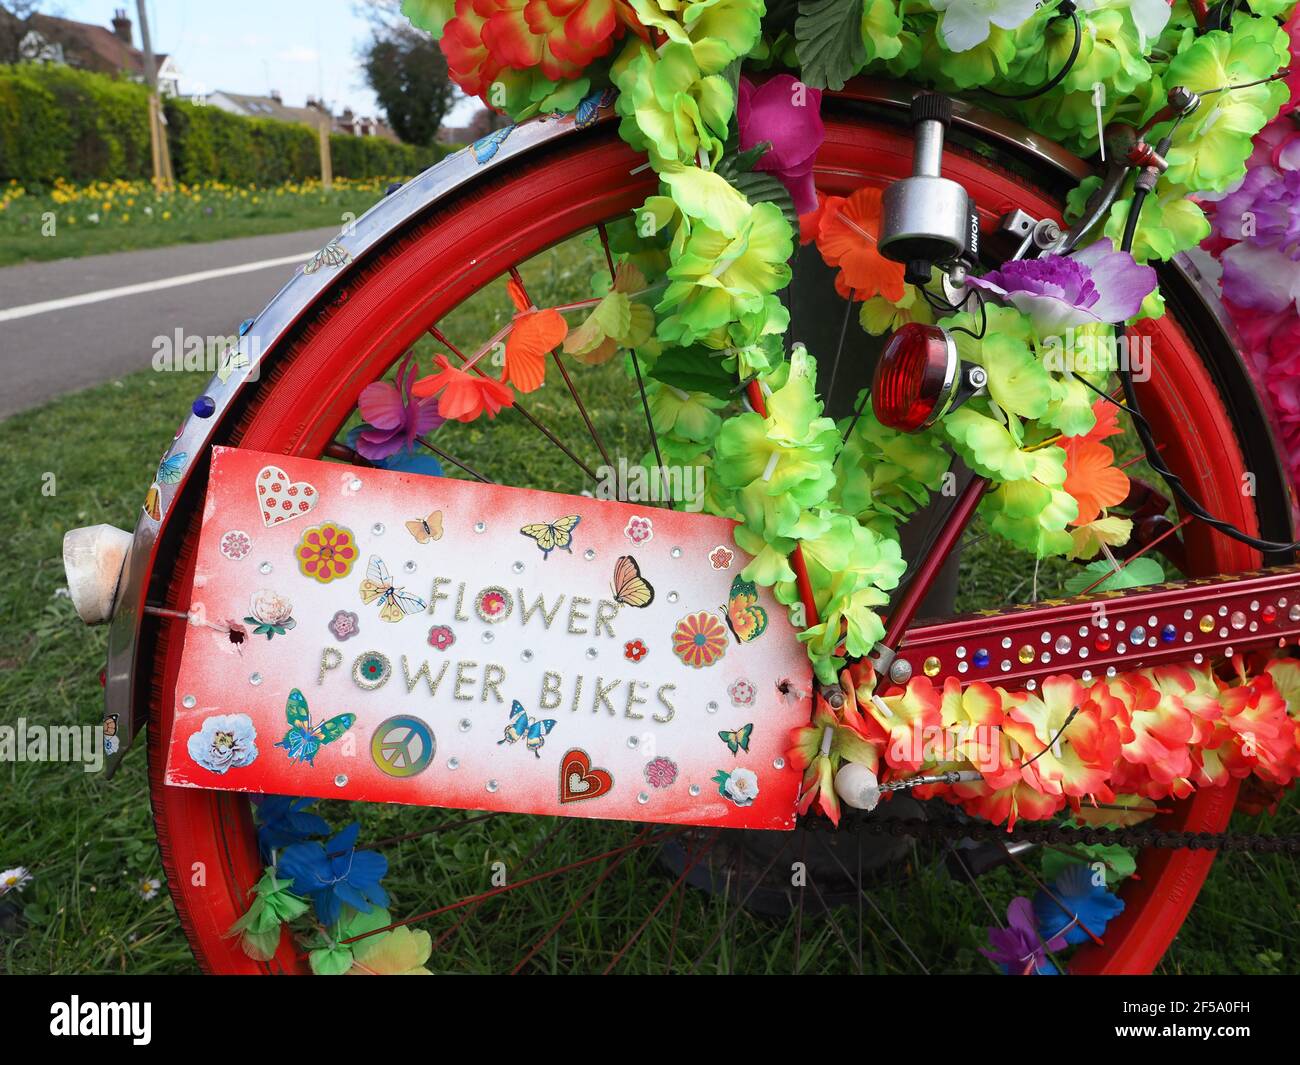 Rainham, Kent, UK. 25th March 2021. A mystery artist has created some stunning  'Flower Power Bikes' around Rainham in Kent - which are bikes that have been artistically decorated with flowers to bring joy to people during lockdown. Credit: James Bell/Alamy Live News Stock Photo